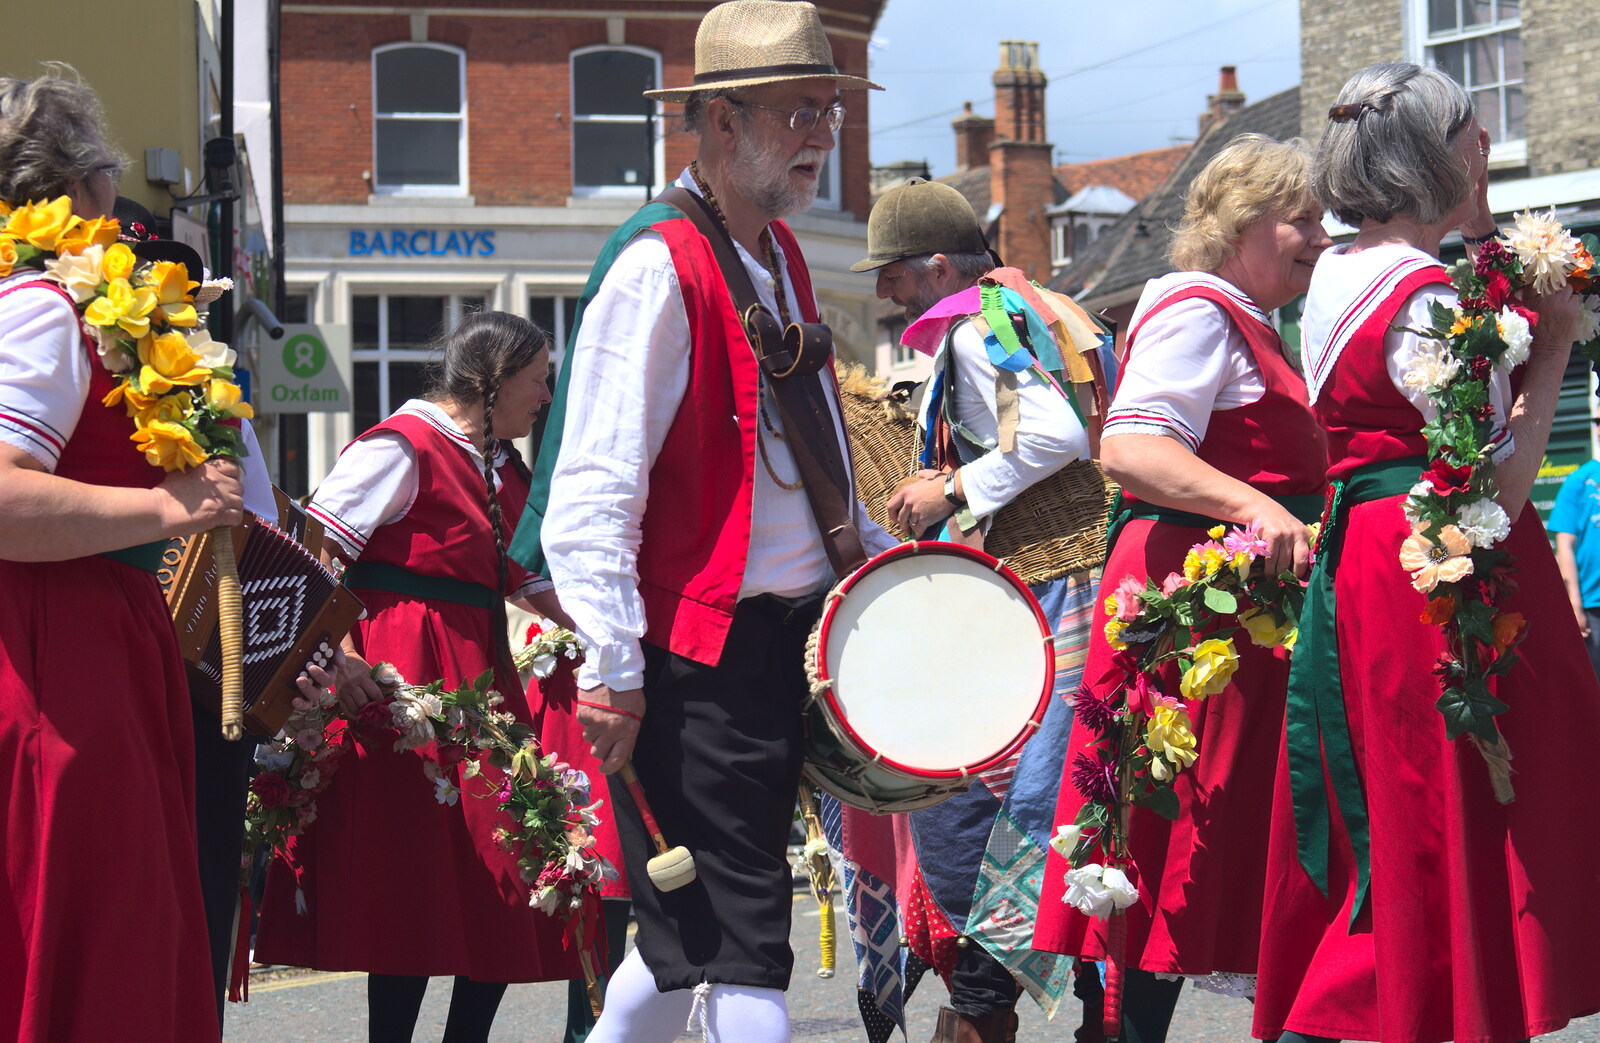 The Morris drummer from Morris Dancing and a Carnival Procession, Diss, Norfolk - 17th June 2012